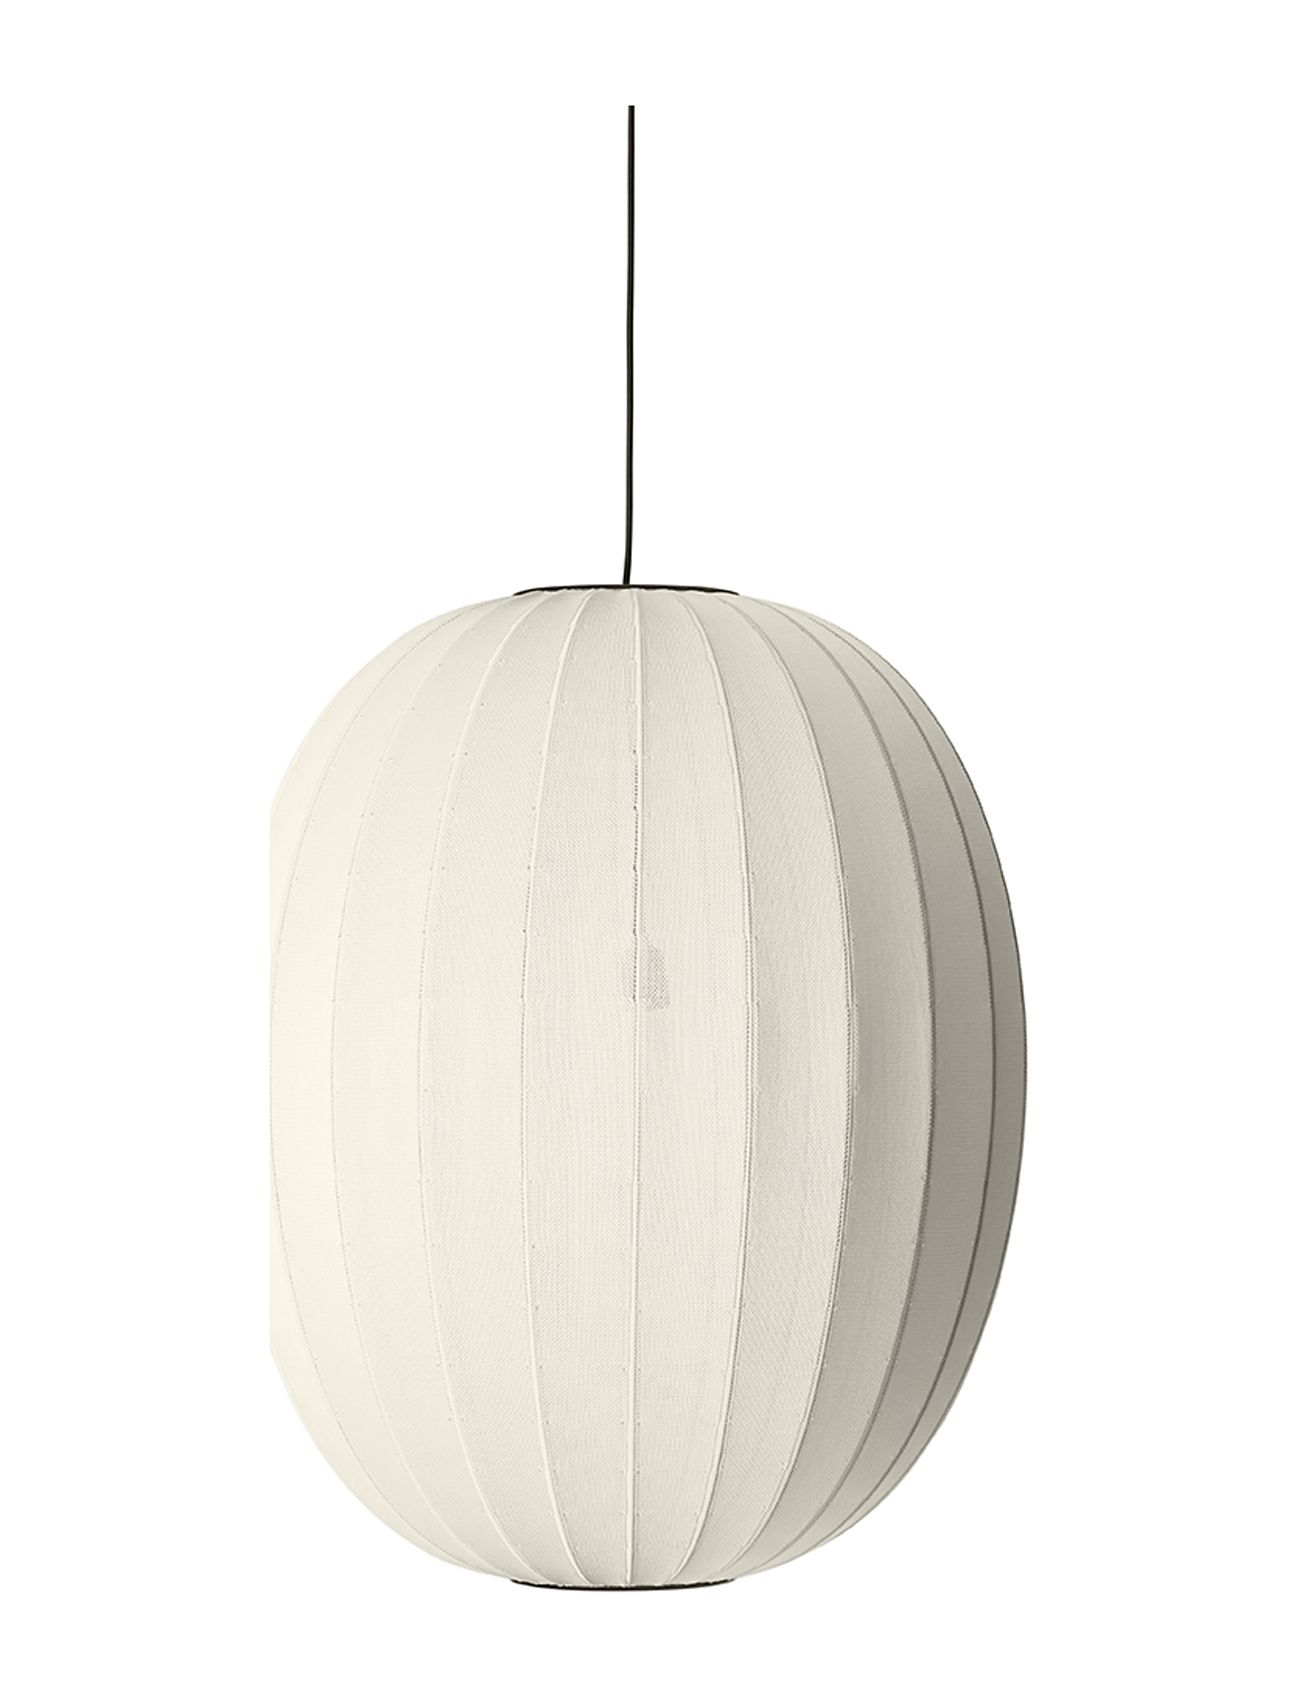 Knit-Wit 65 High Oval Pendant Home Lighting Lamps Ceiling Lamps Pendant Lamps White Made By Hand